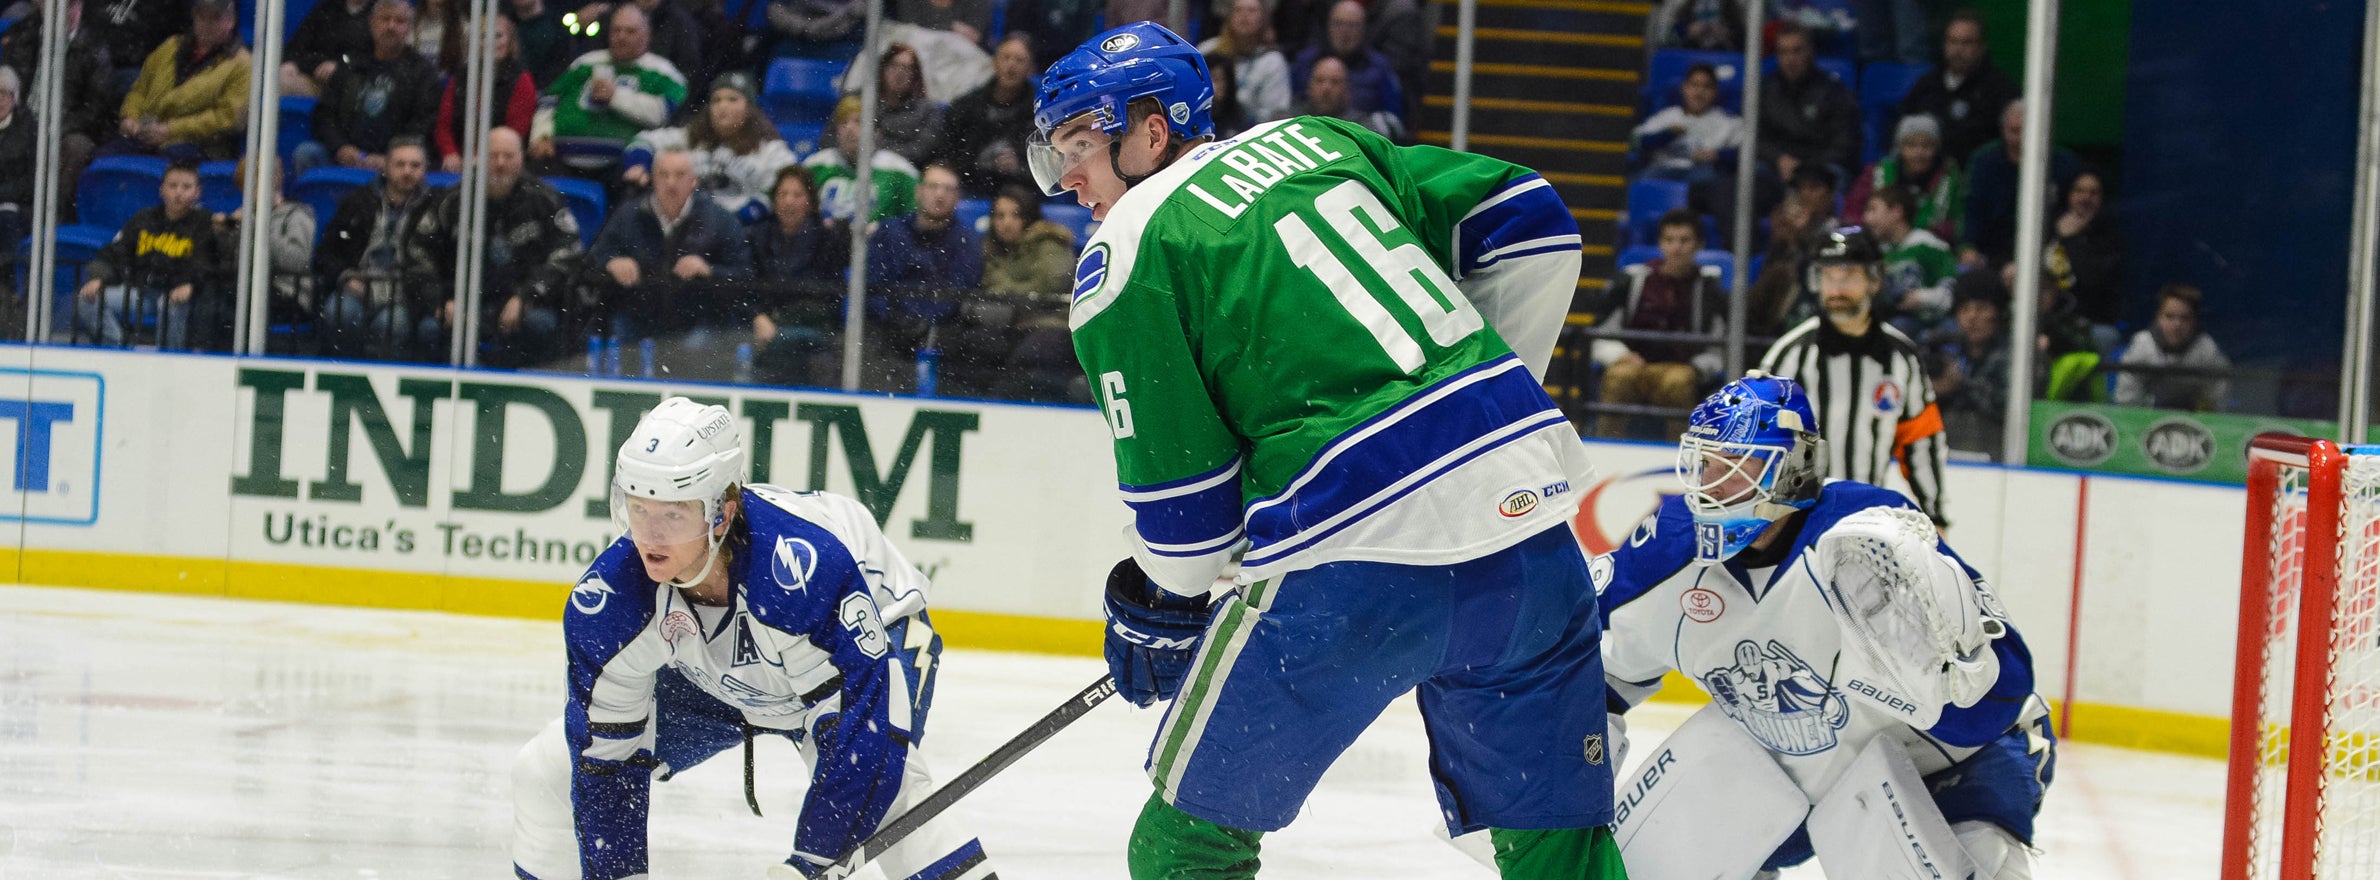 COMETS GO FOR WEEKEND SWEEP OF CRUNCH